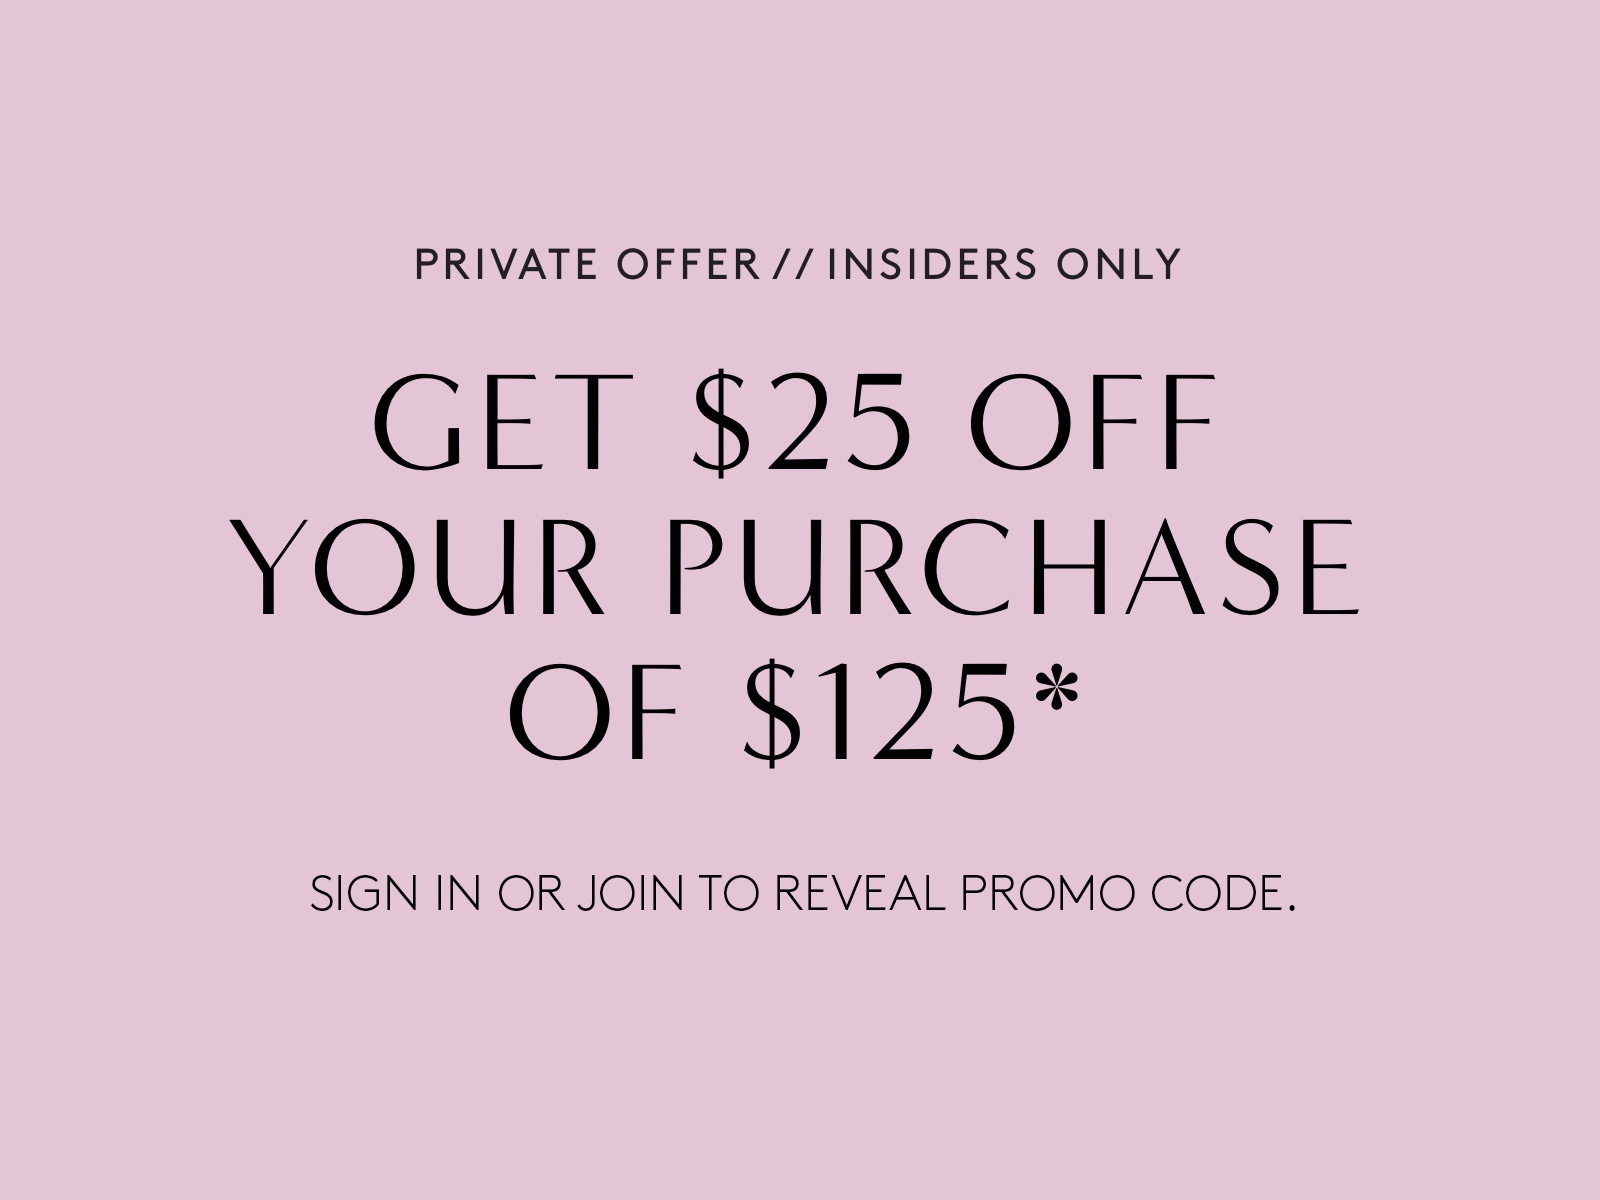 Insiders only! Get $25 off your purchase of $125. Sign in or join to reveal promo code.